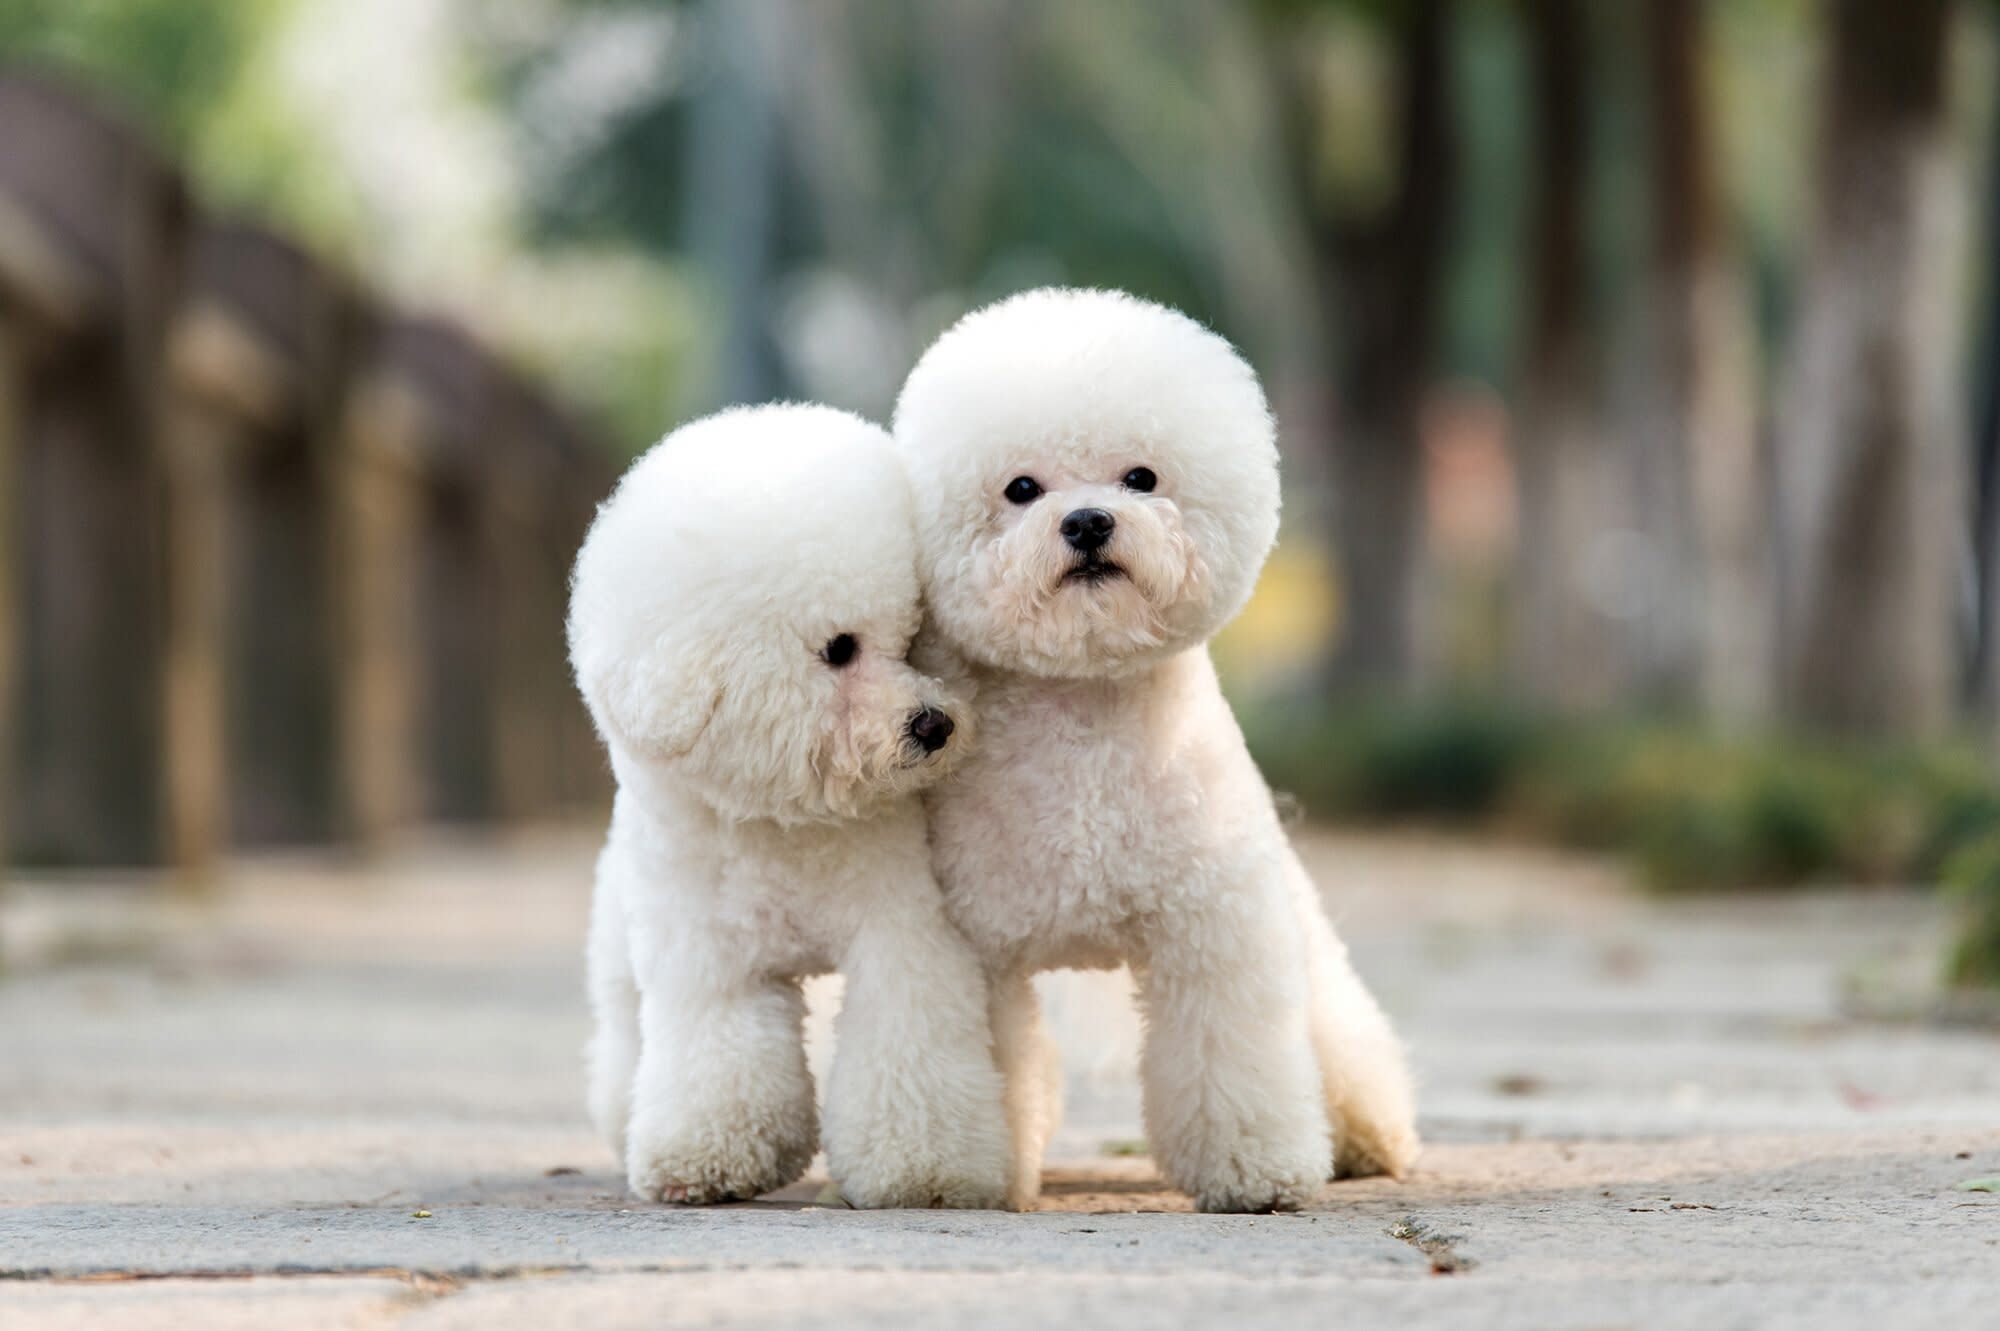 5. 15 Adorable Standard Poodle Haircuts You'll Want to Try - wide 2